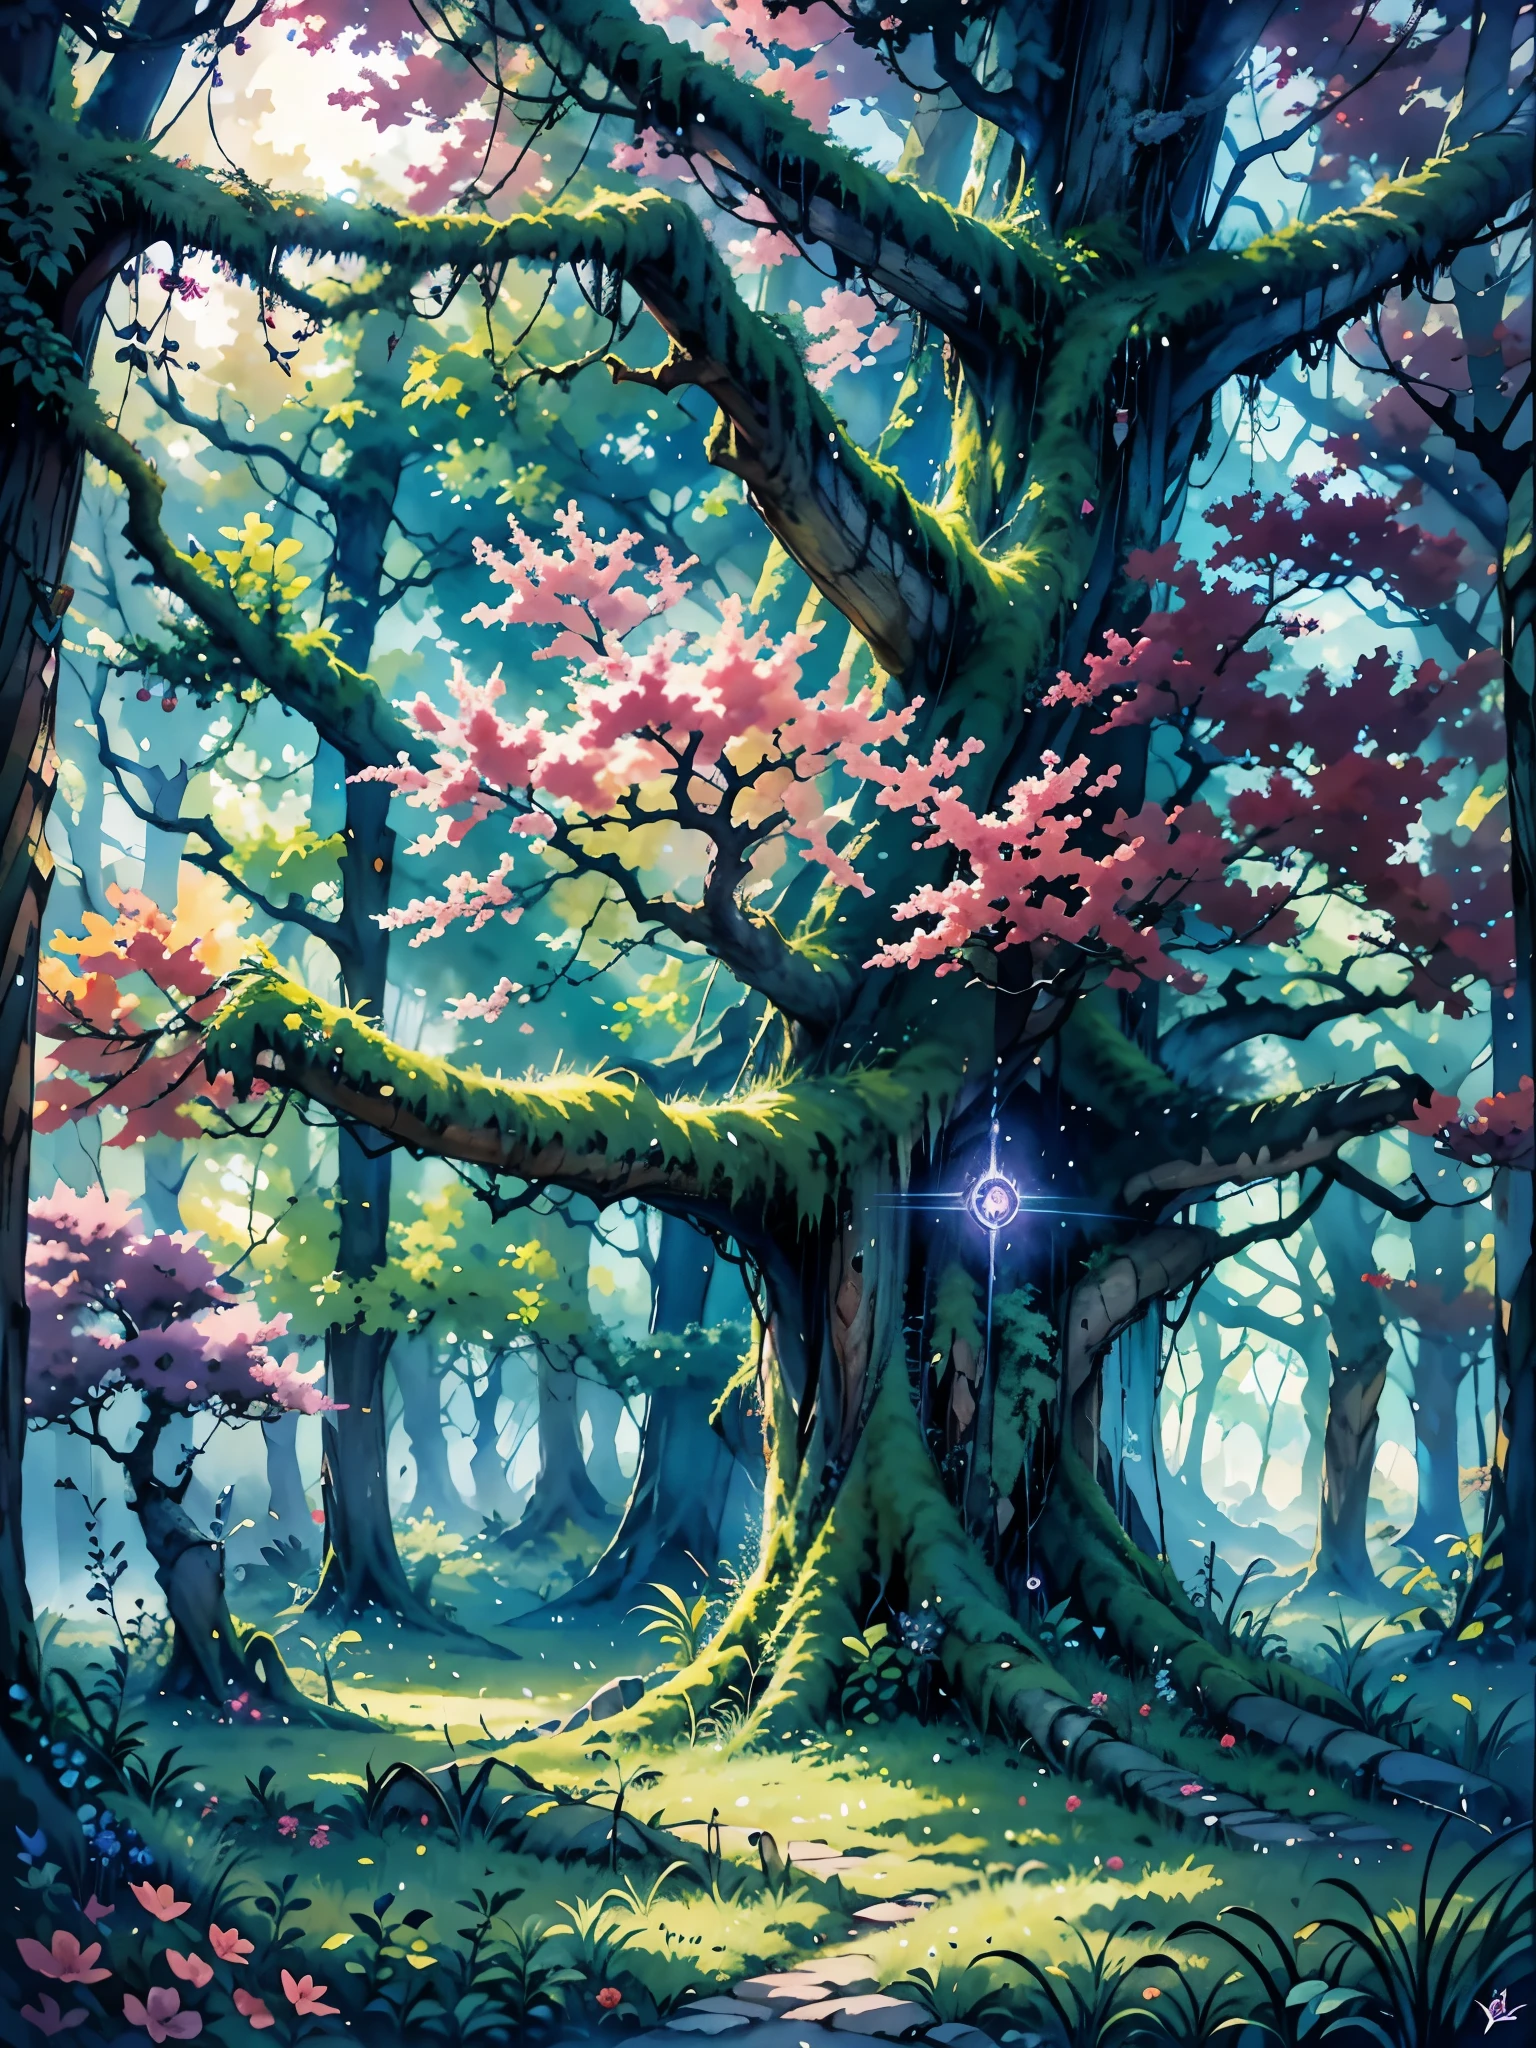 pixel art, magical plant, star dusts, night, darkness, glowing, purple, red, forest, Tree of life, Yggdrasill, world tree